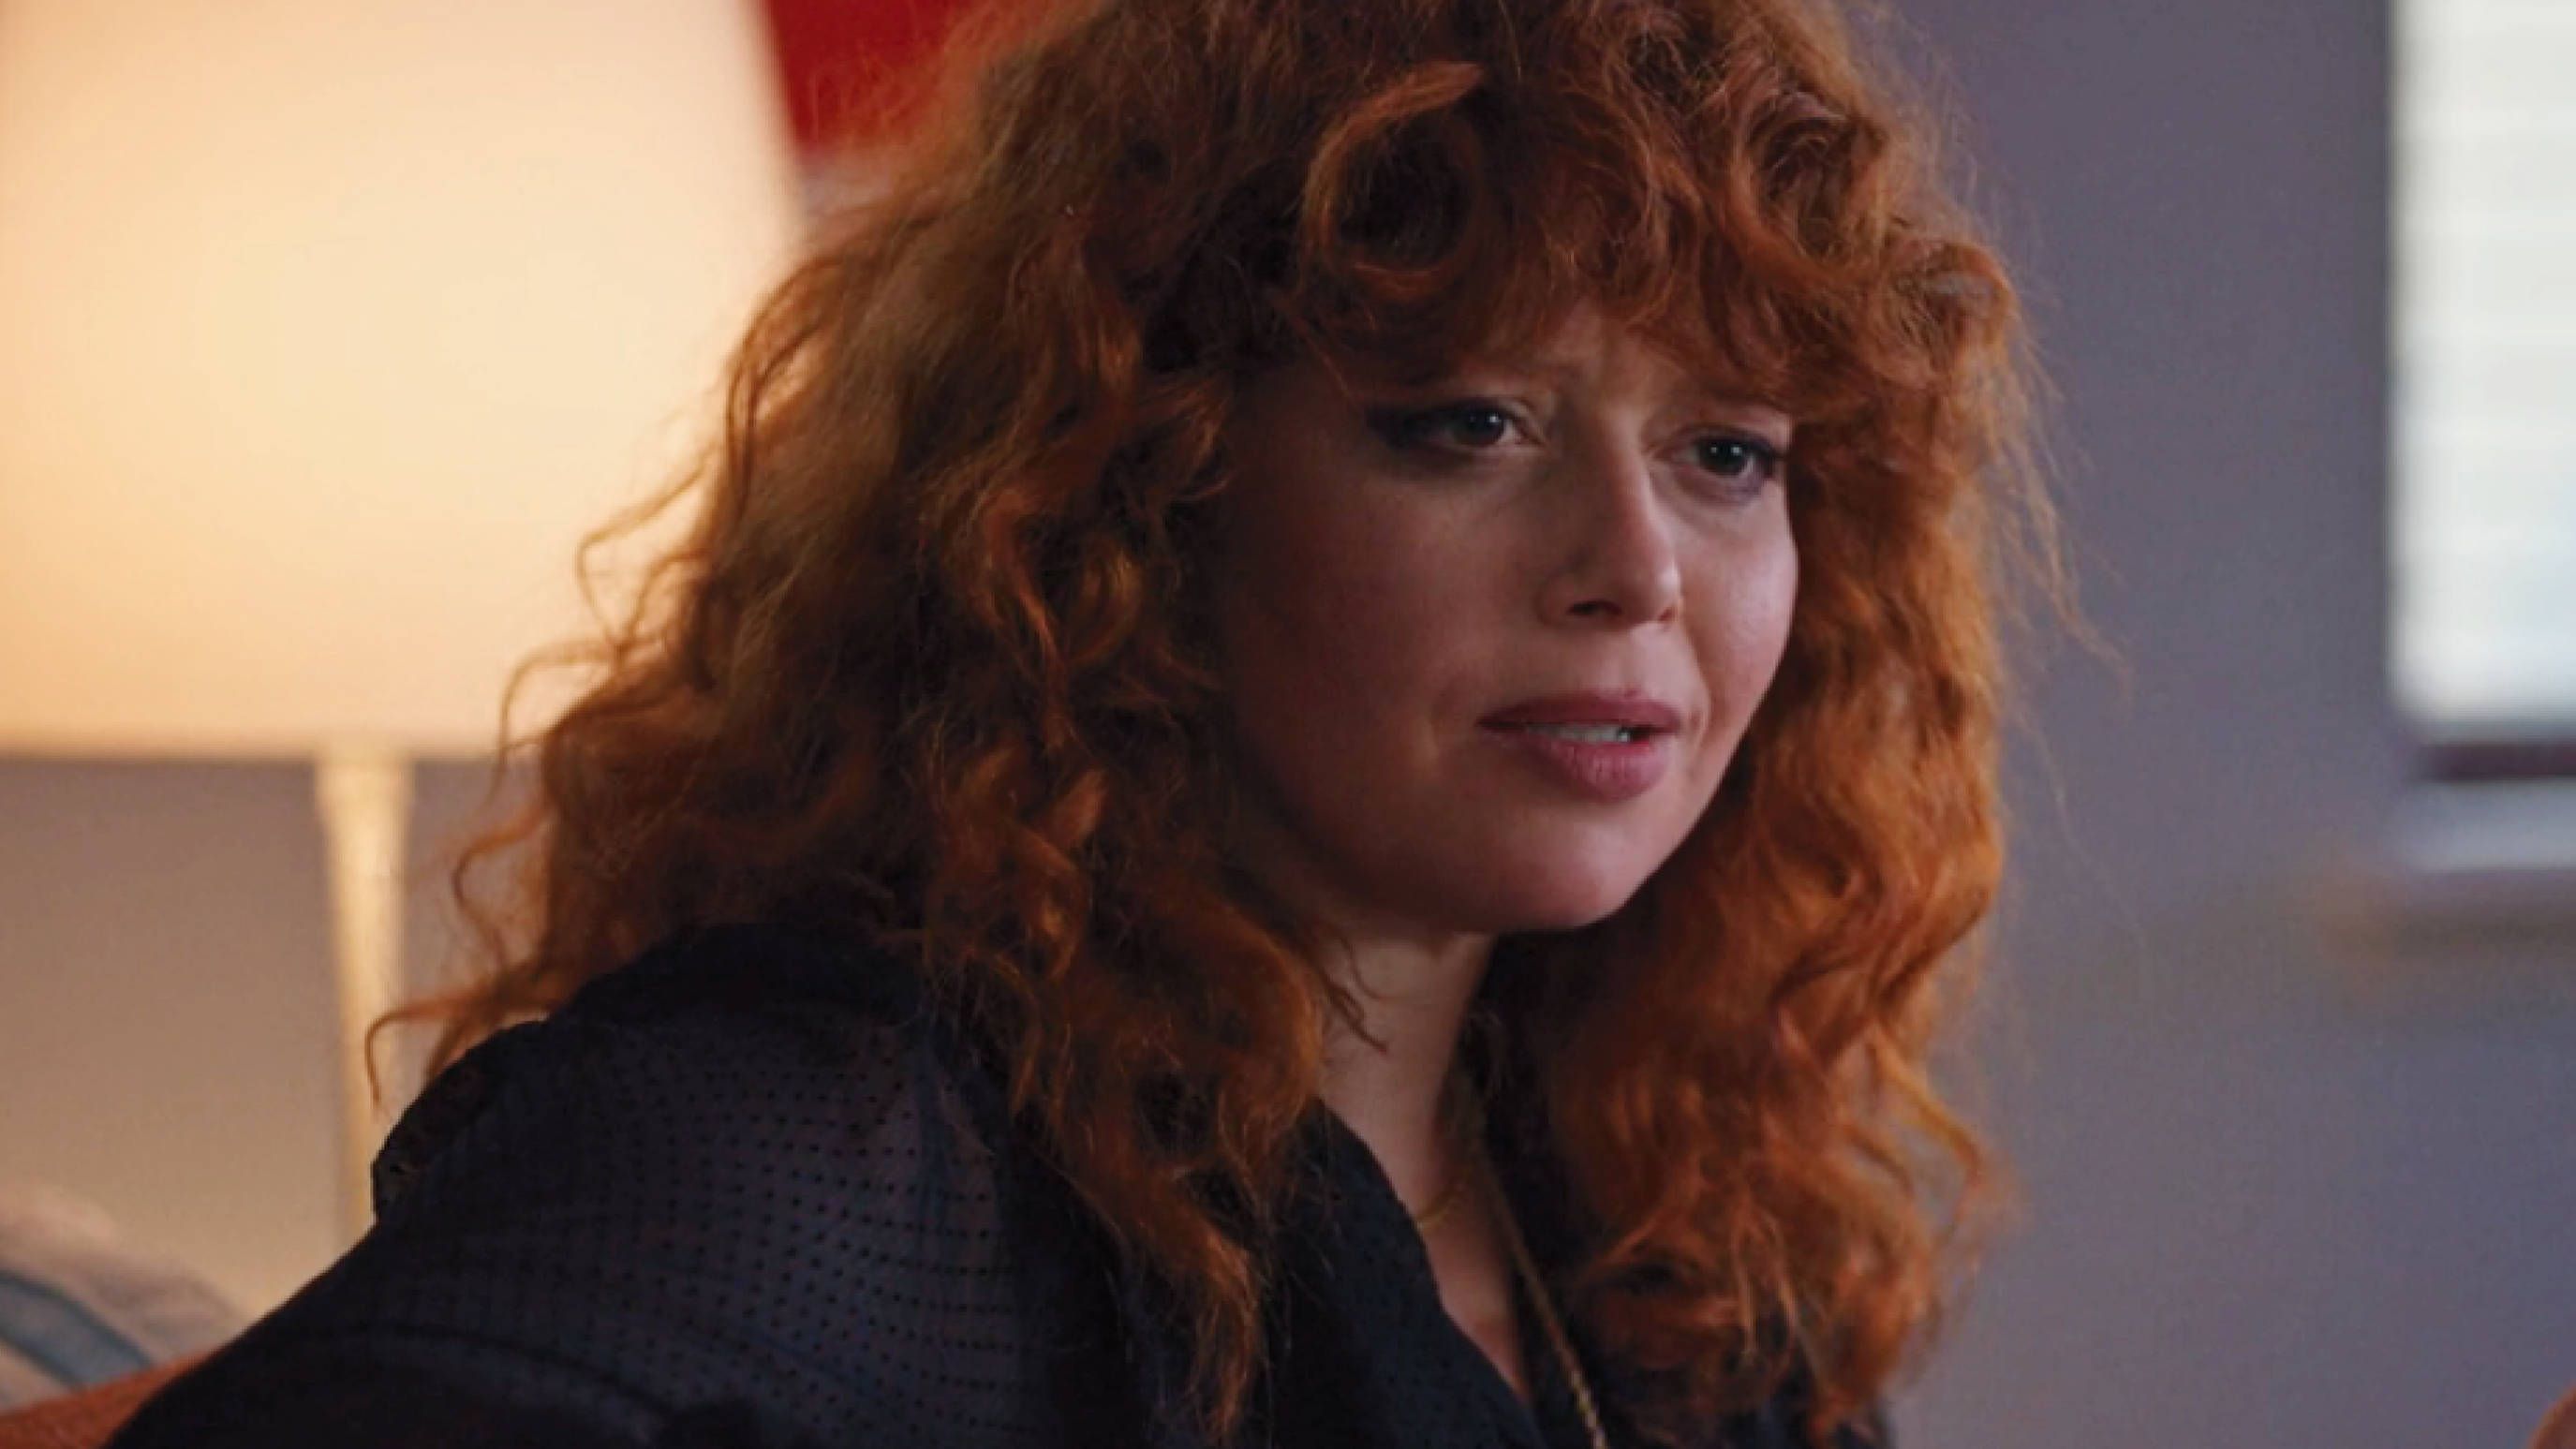 This major easter egg in 'Russian Doll' will make you rethink